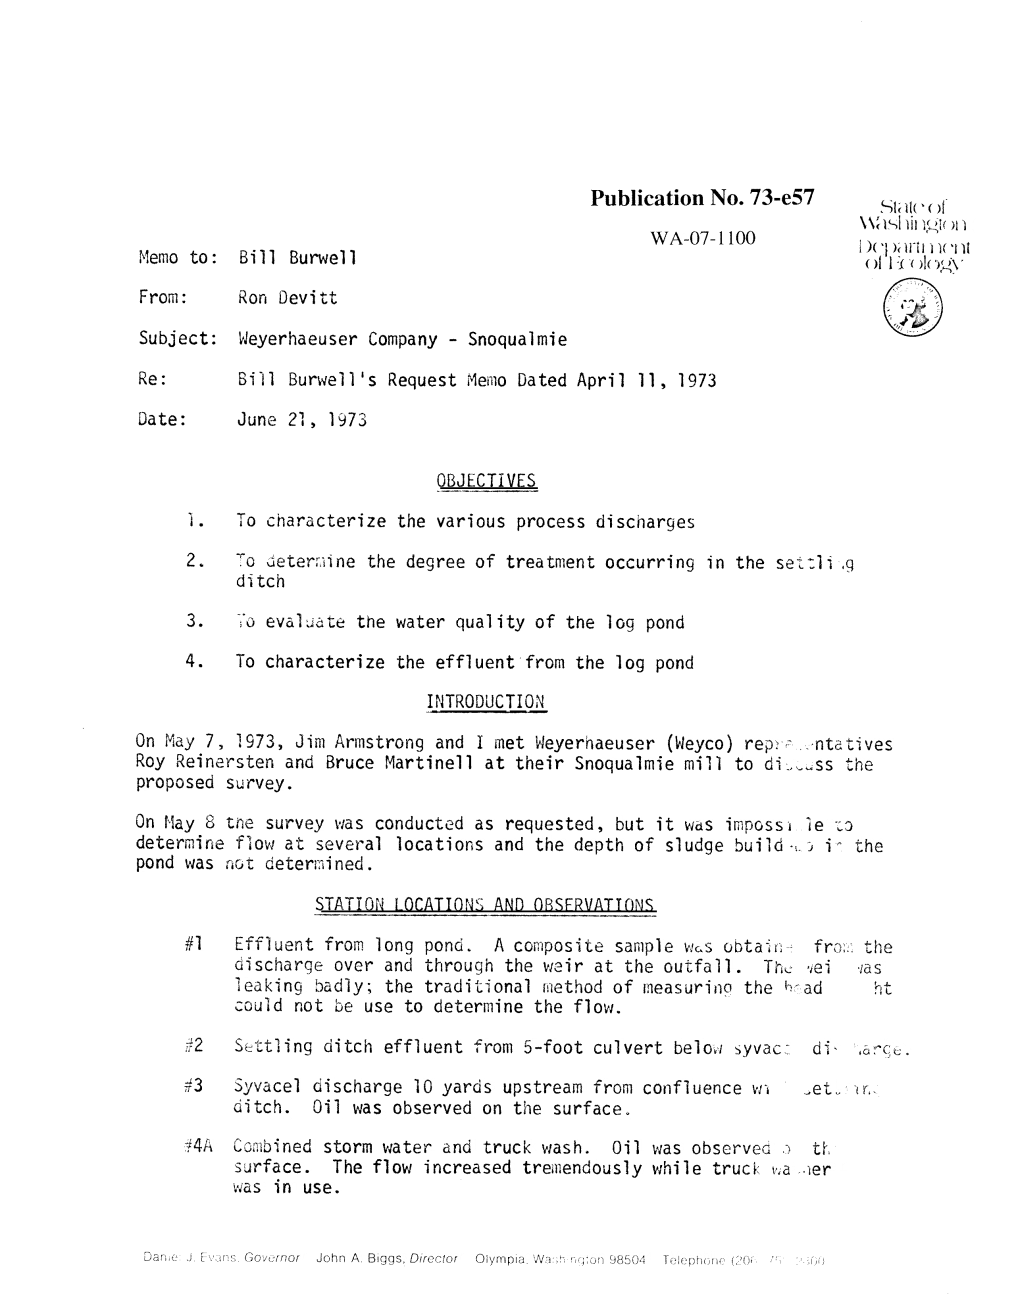 Weyerhaeuser Company — Snoqualmie Re: Bill I3urwell’S Request Memo Dated April 11, 1973